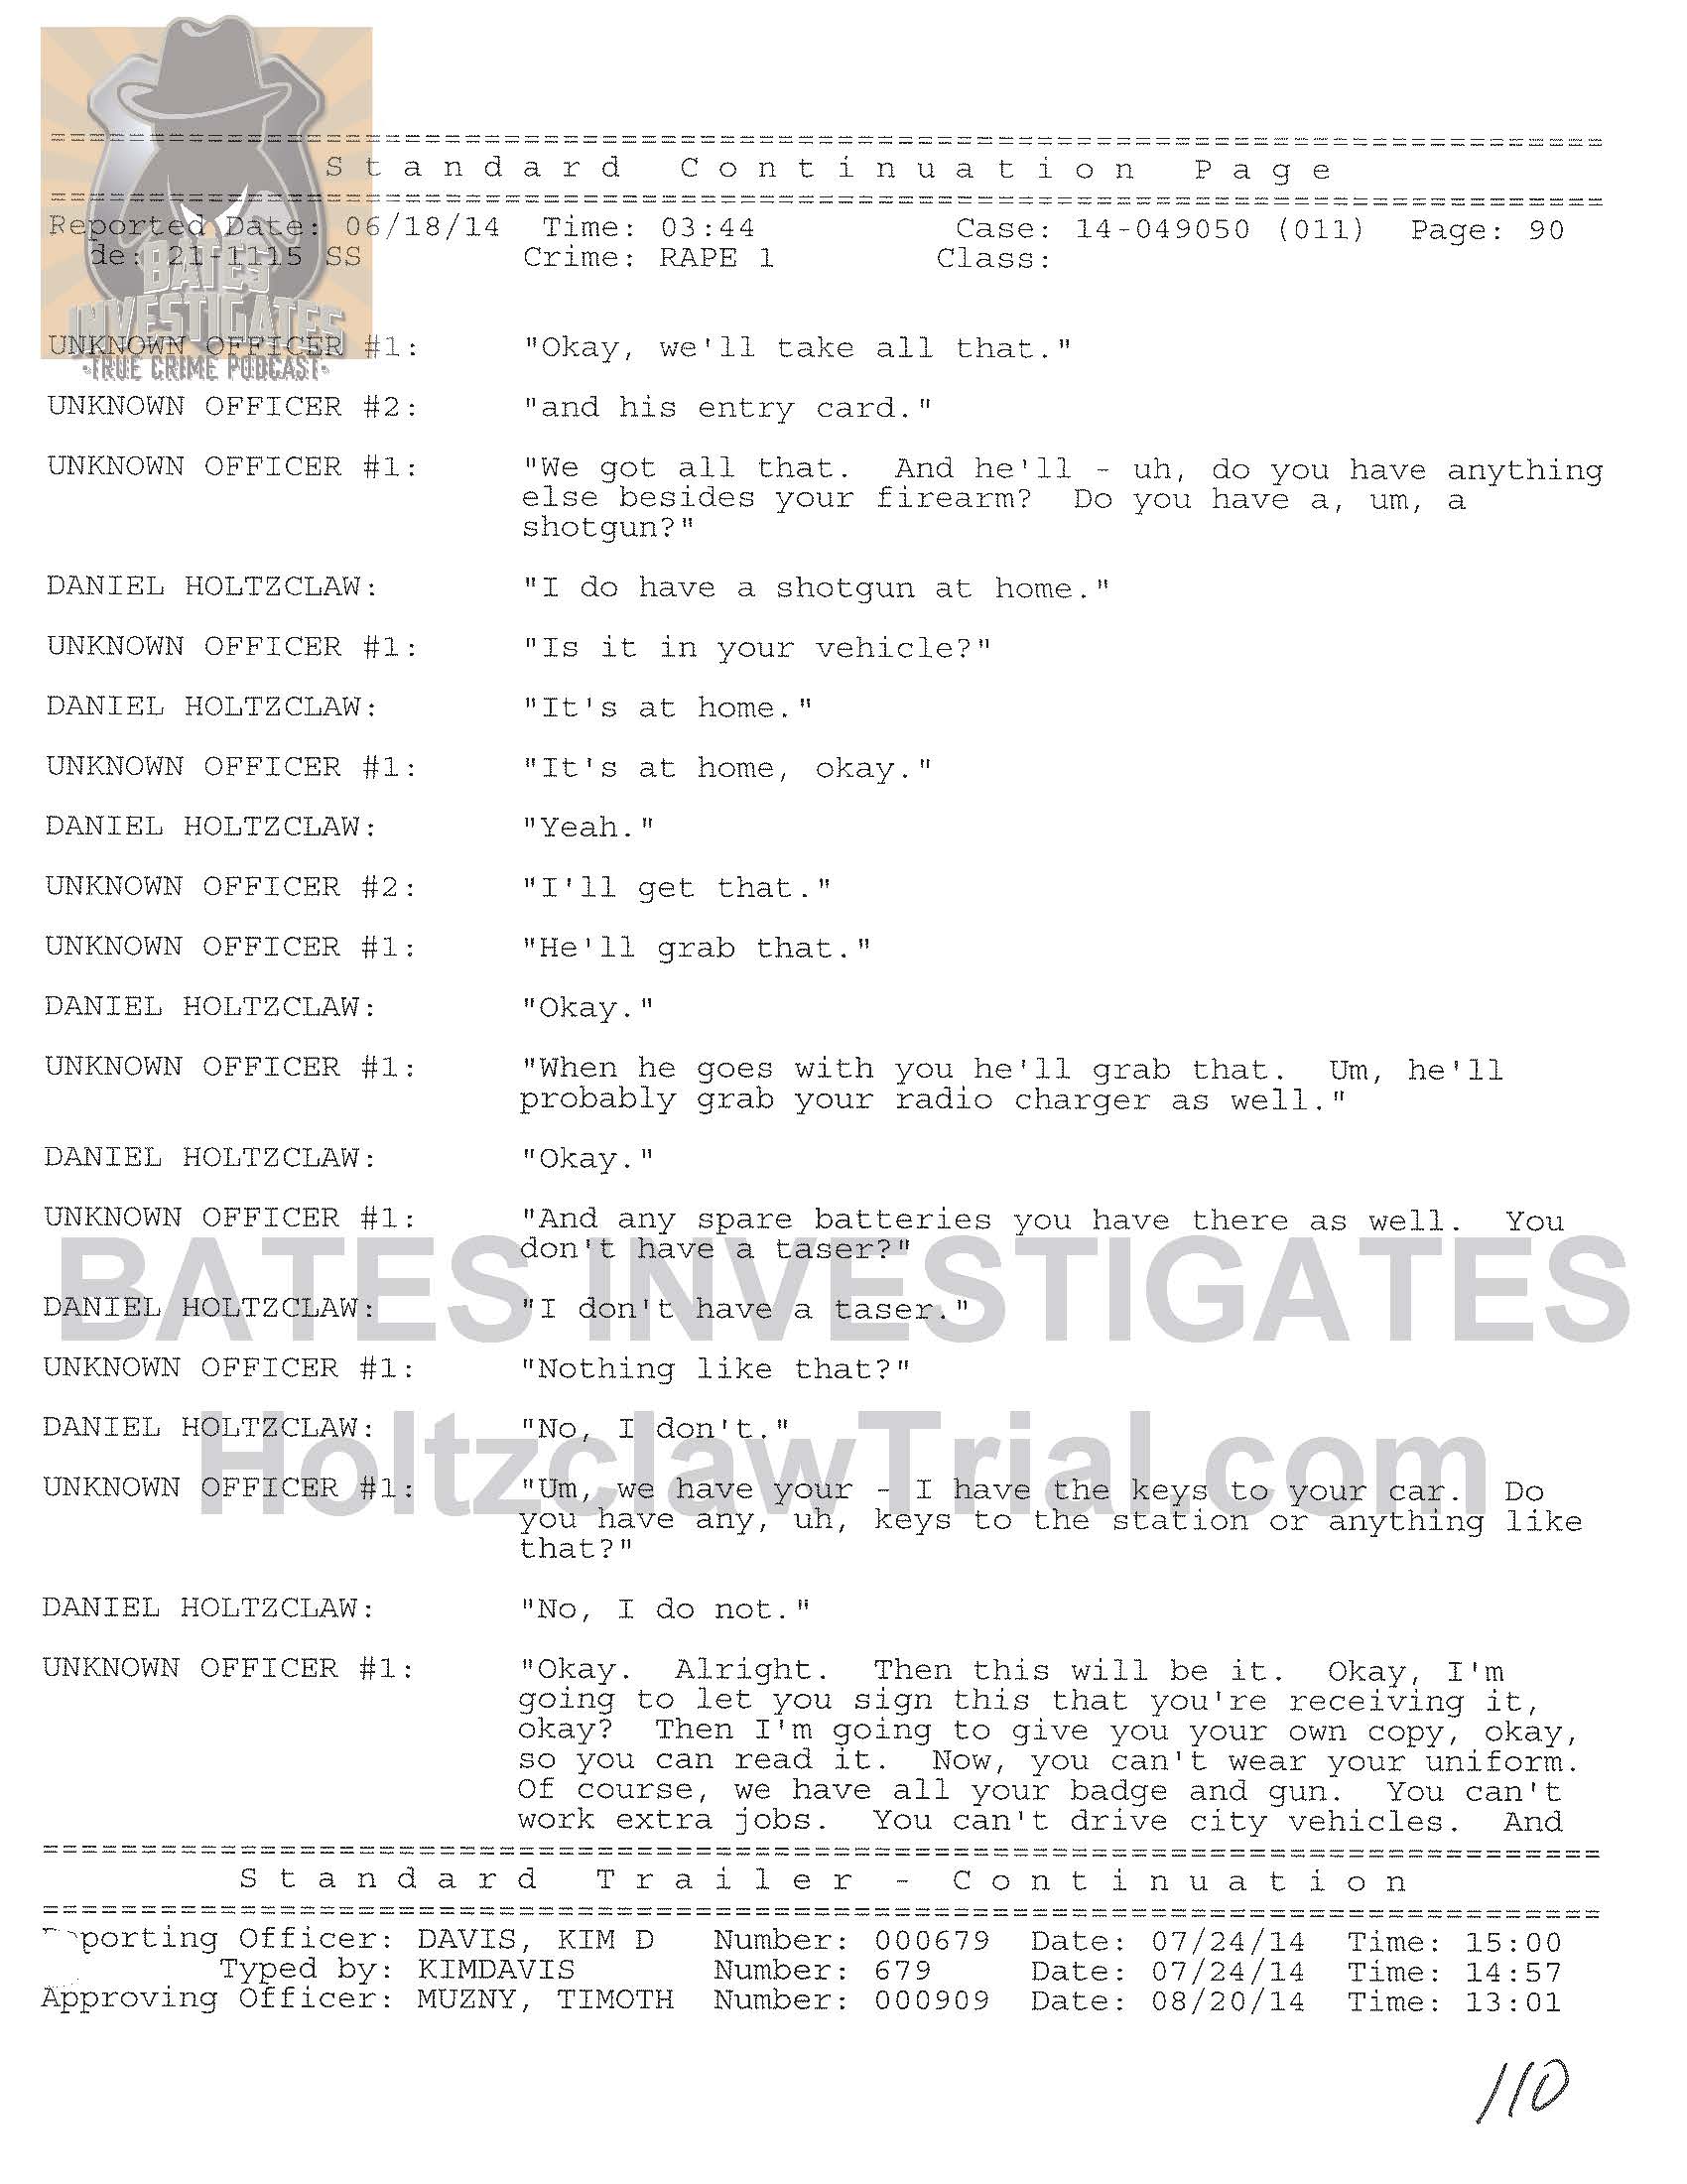 Holtzclaw Interrogation Transcript - Ep02 Redacted_Page_90.jpg